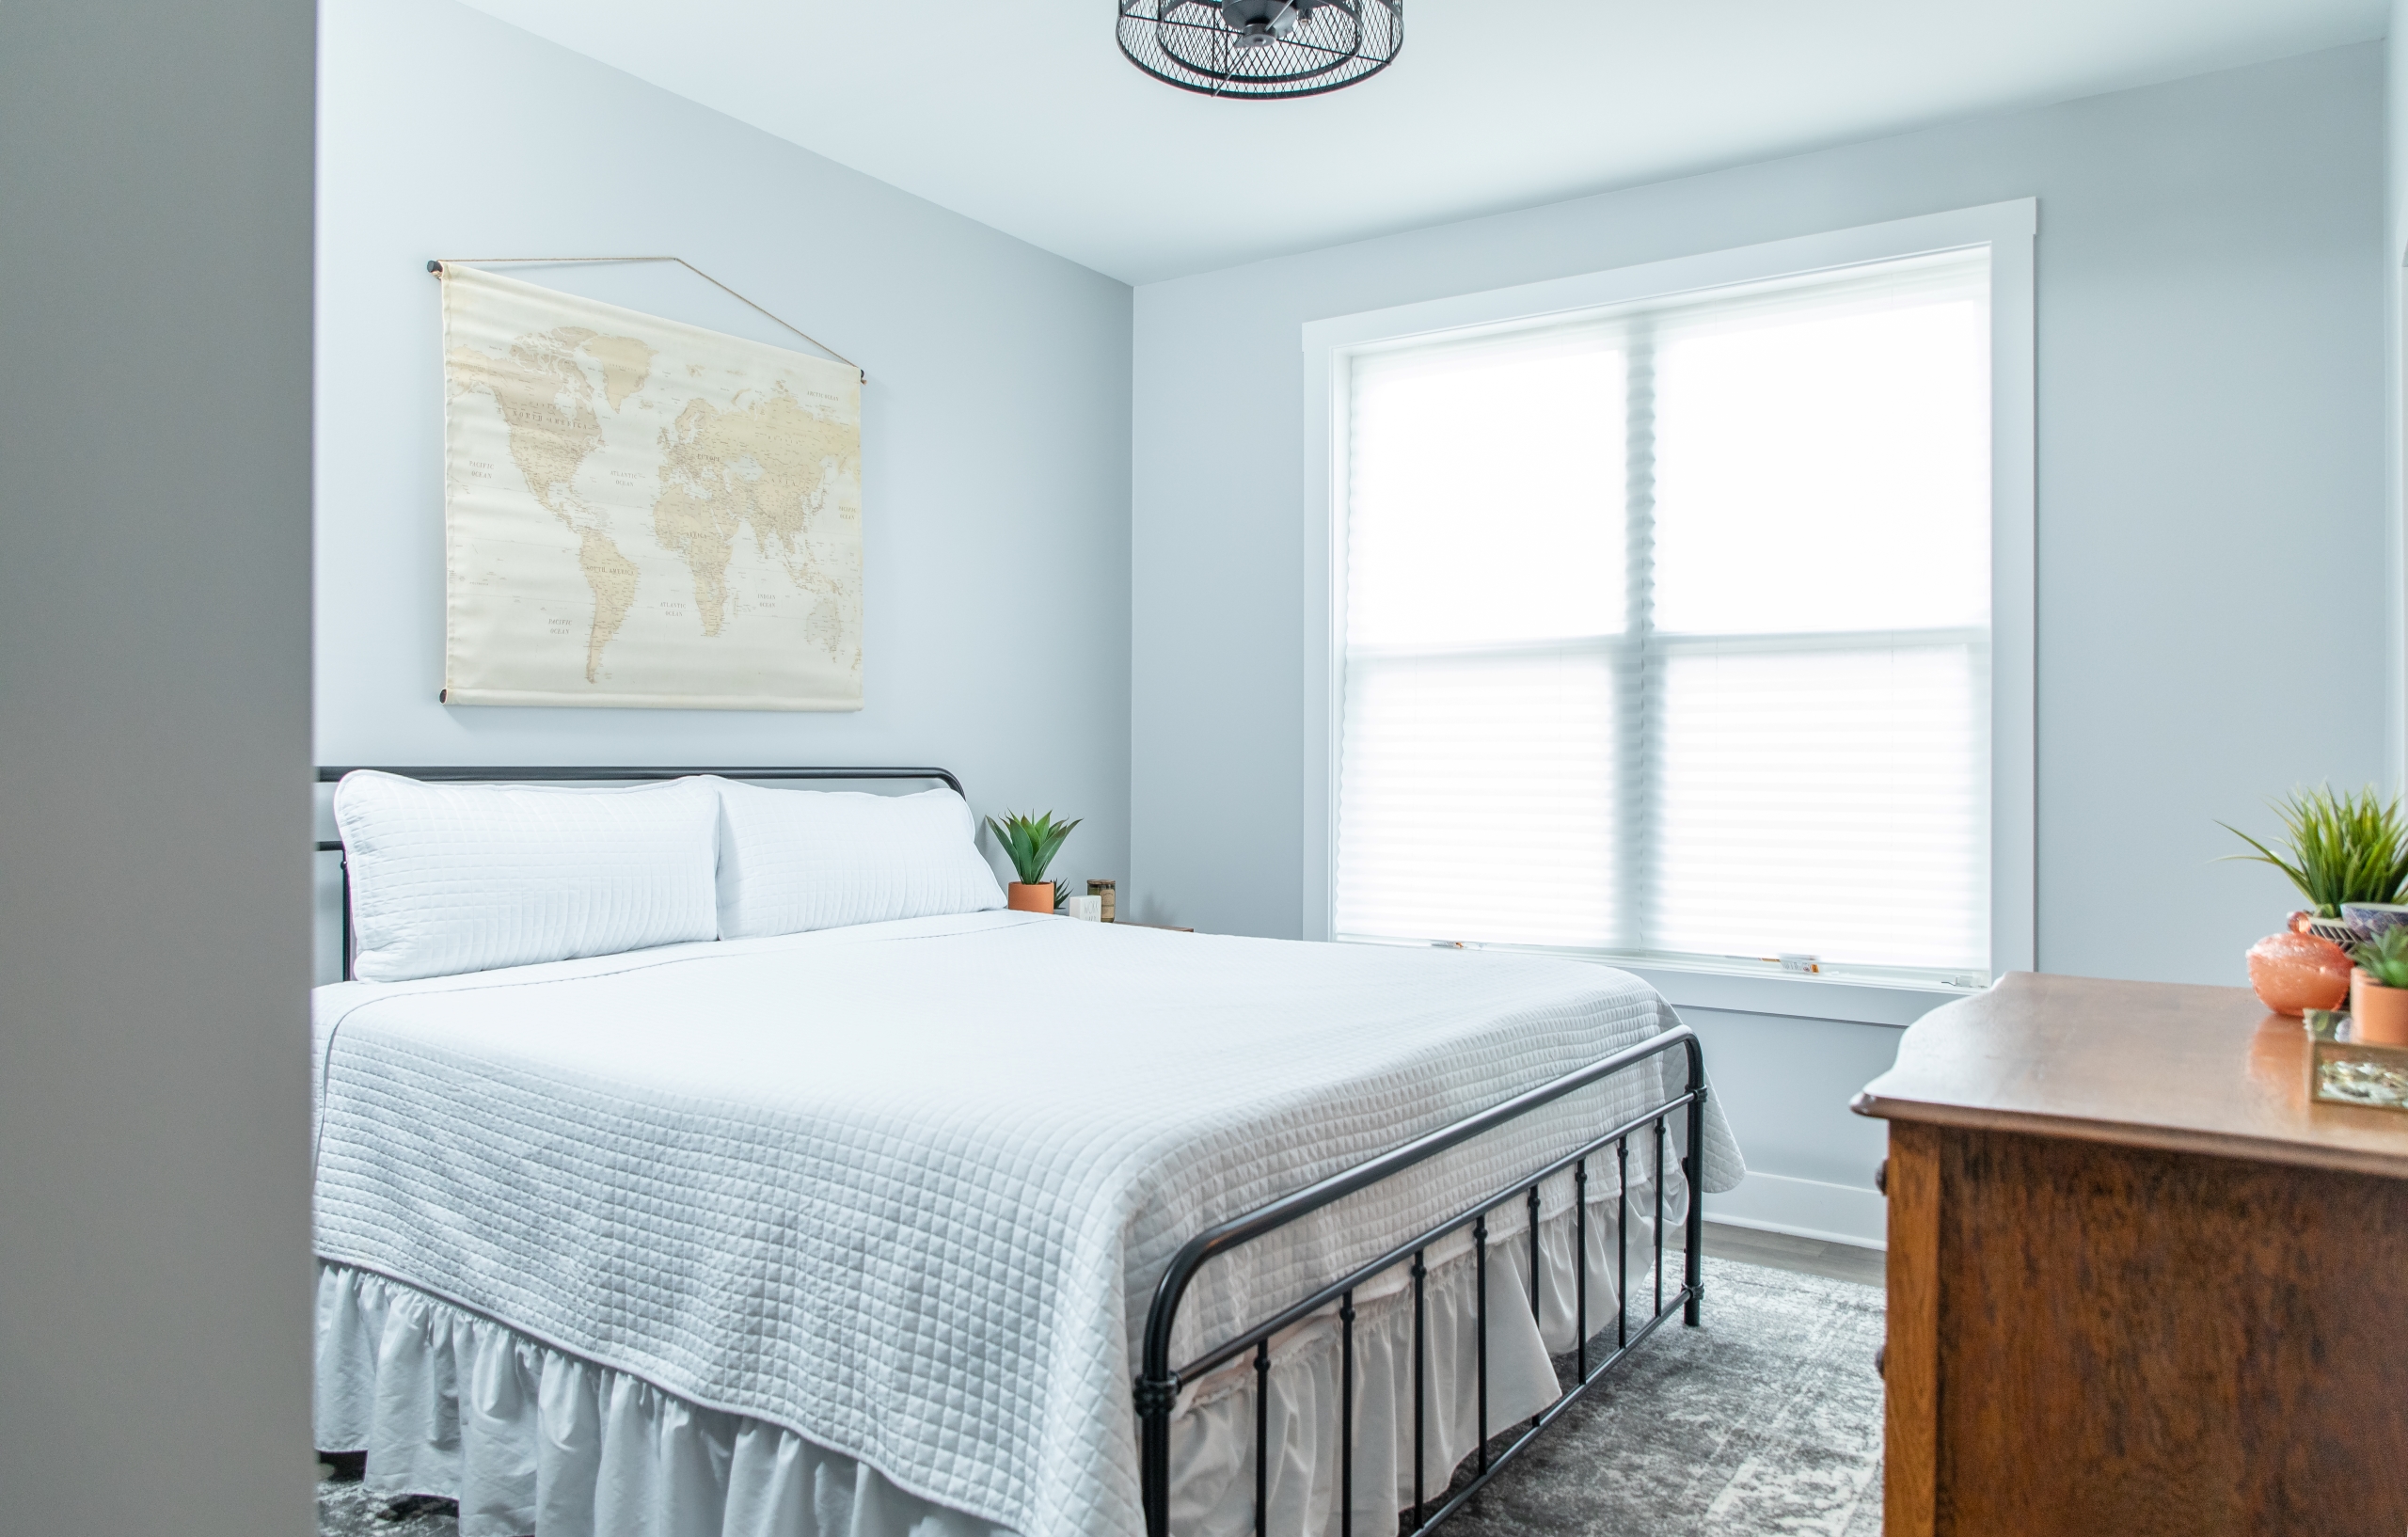 Woodline Building Company Project: Modern Farmhouse Bedroom